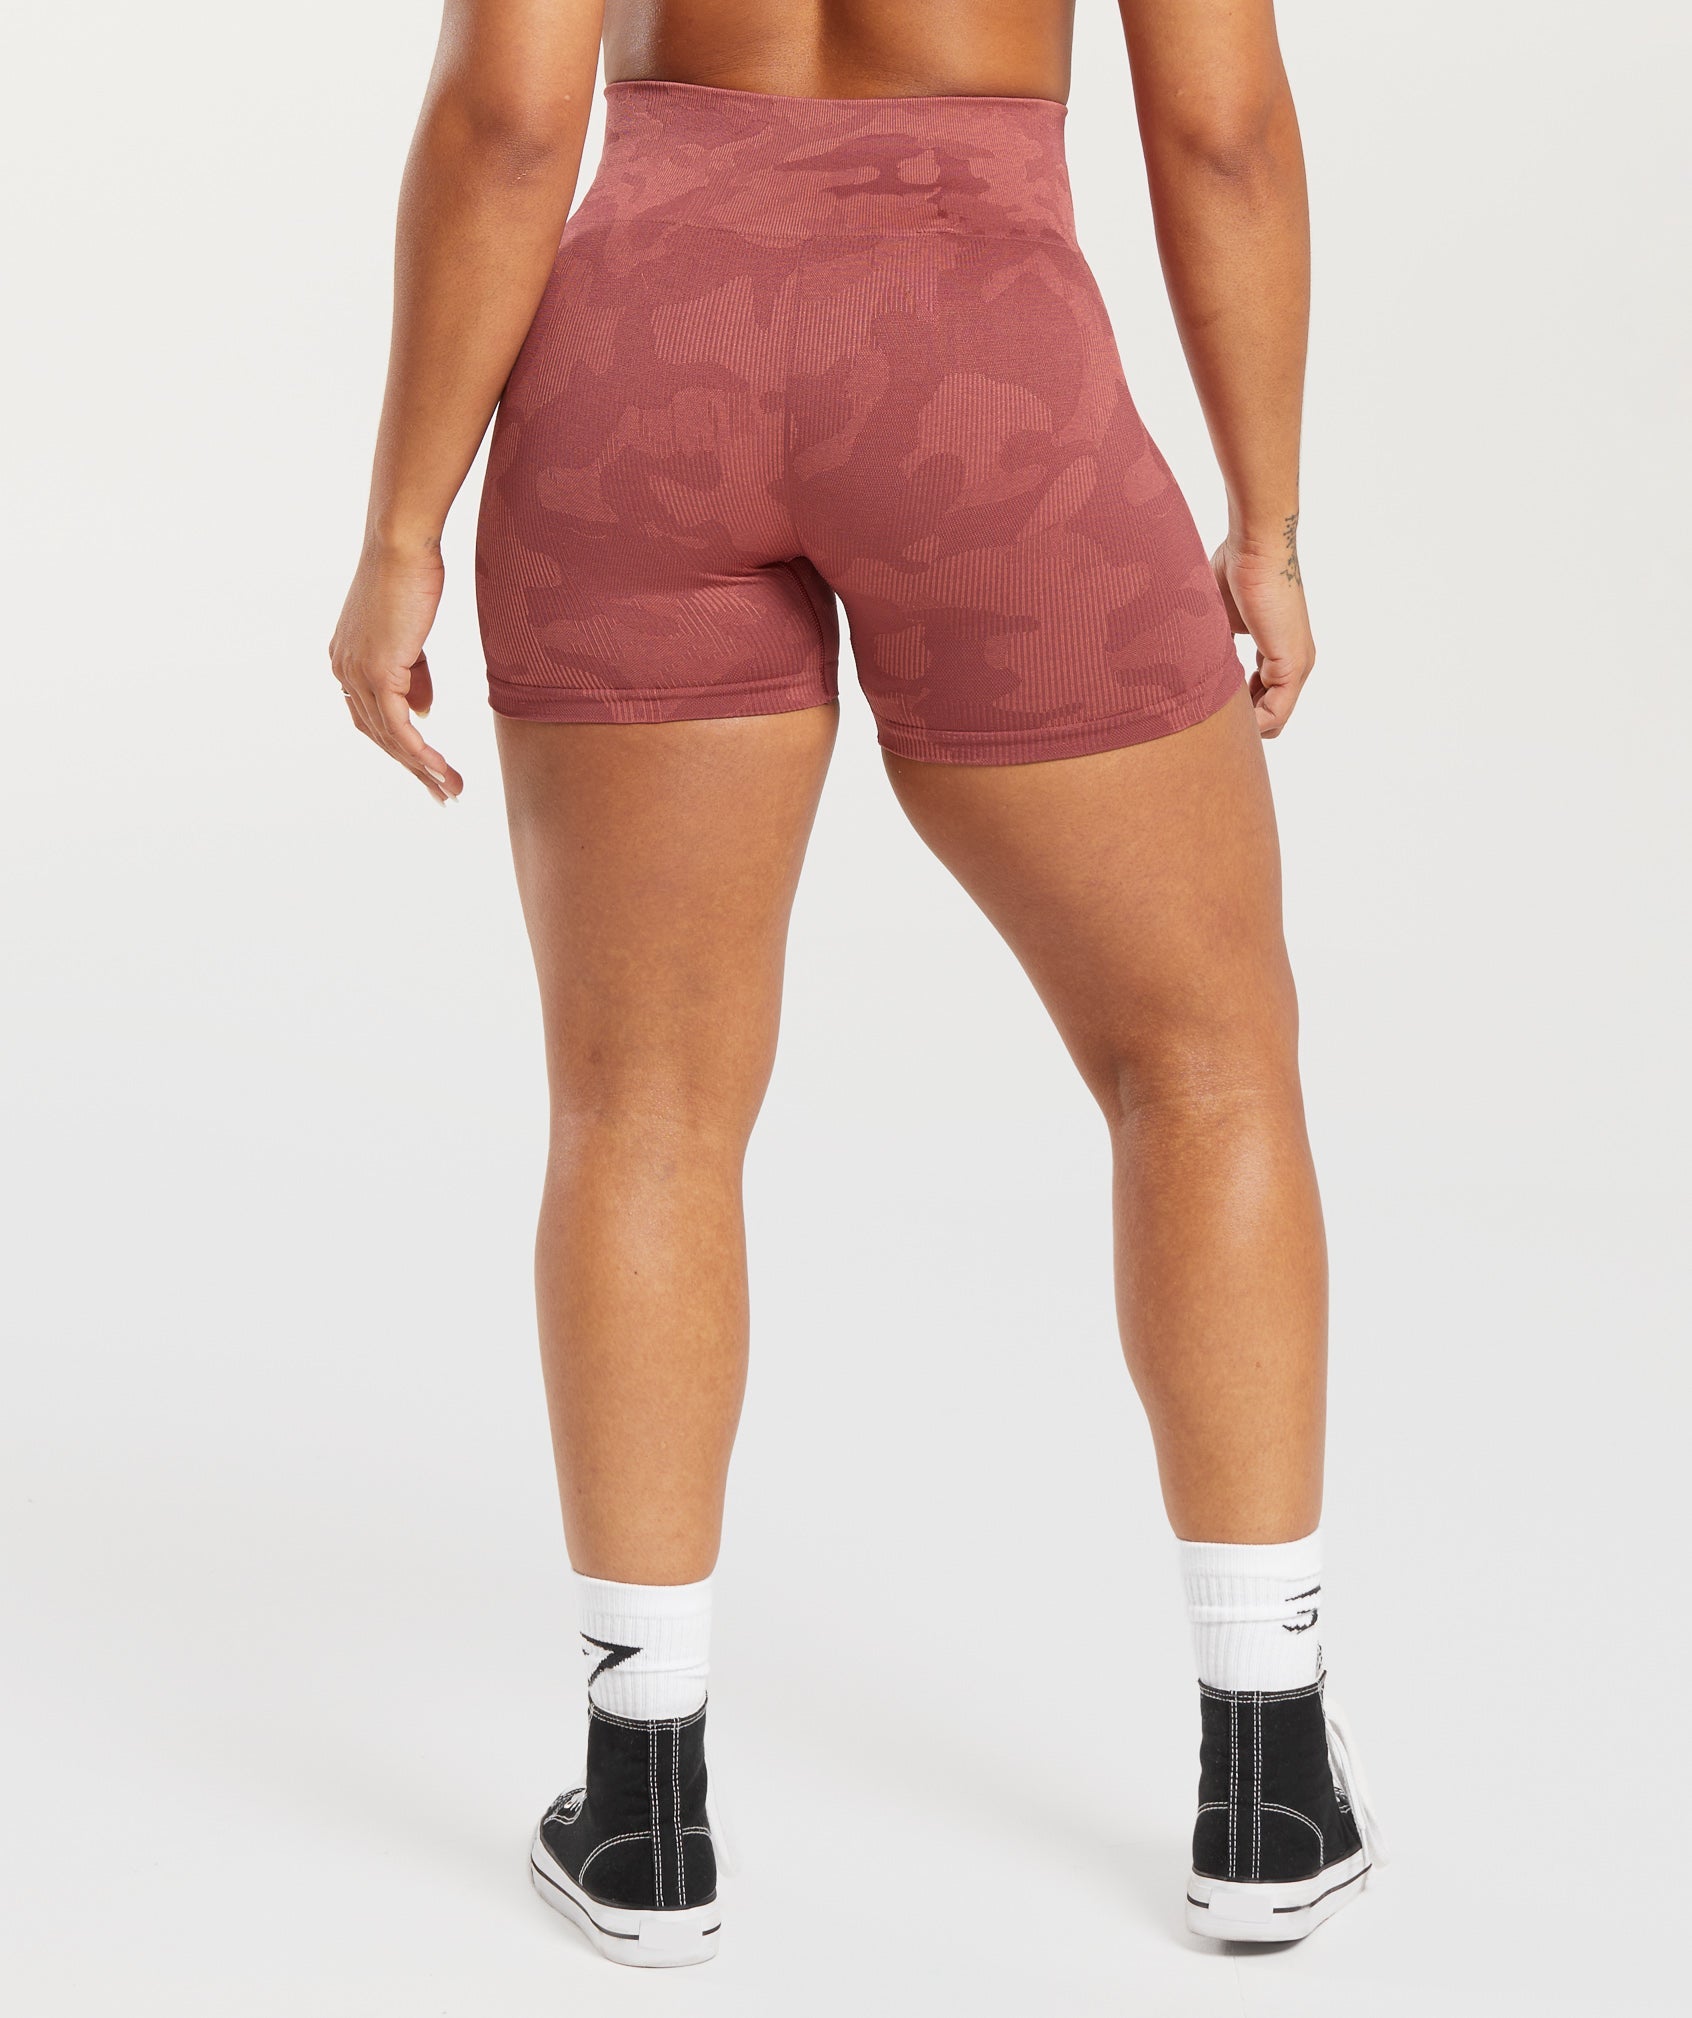 Adapt Camo Seamless Ribbed Shorts in Soft Berry/Sunbaked Pink - view 2